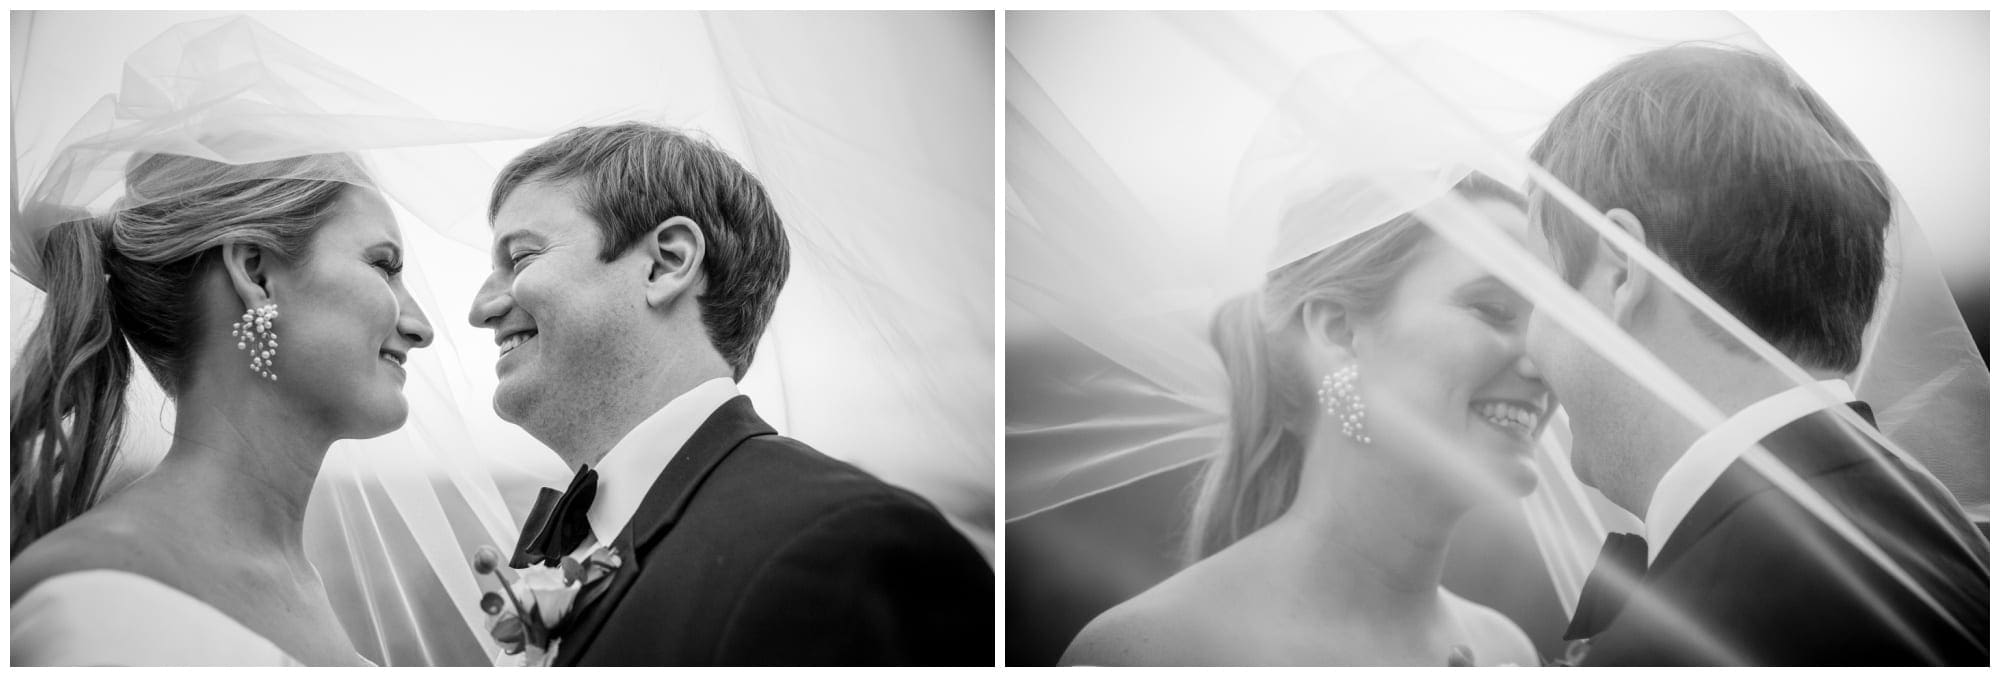 Veil photographs in black and white